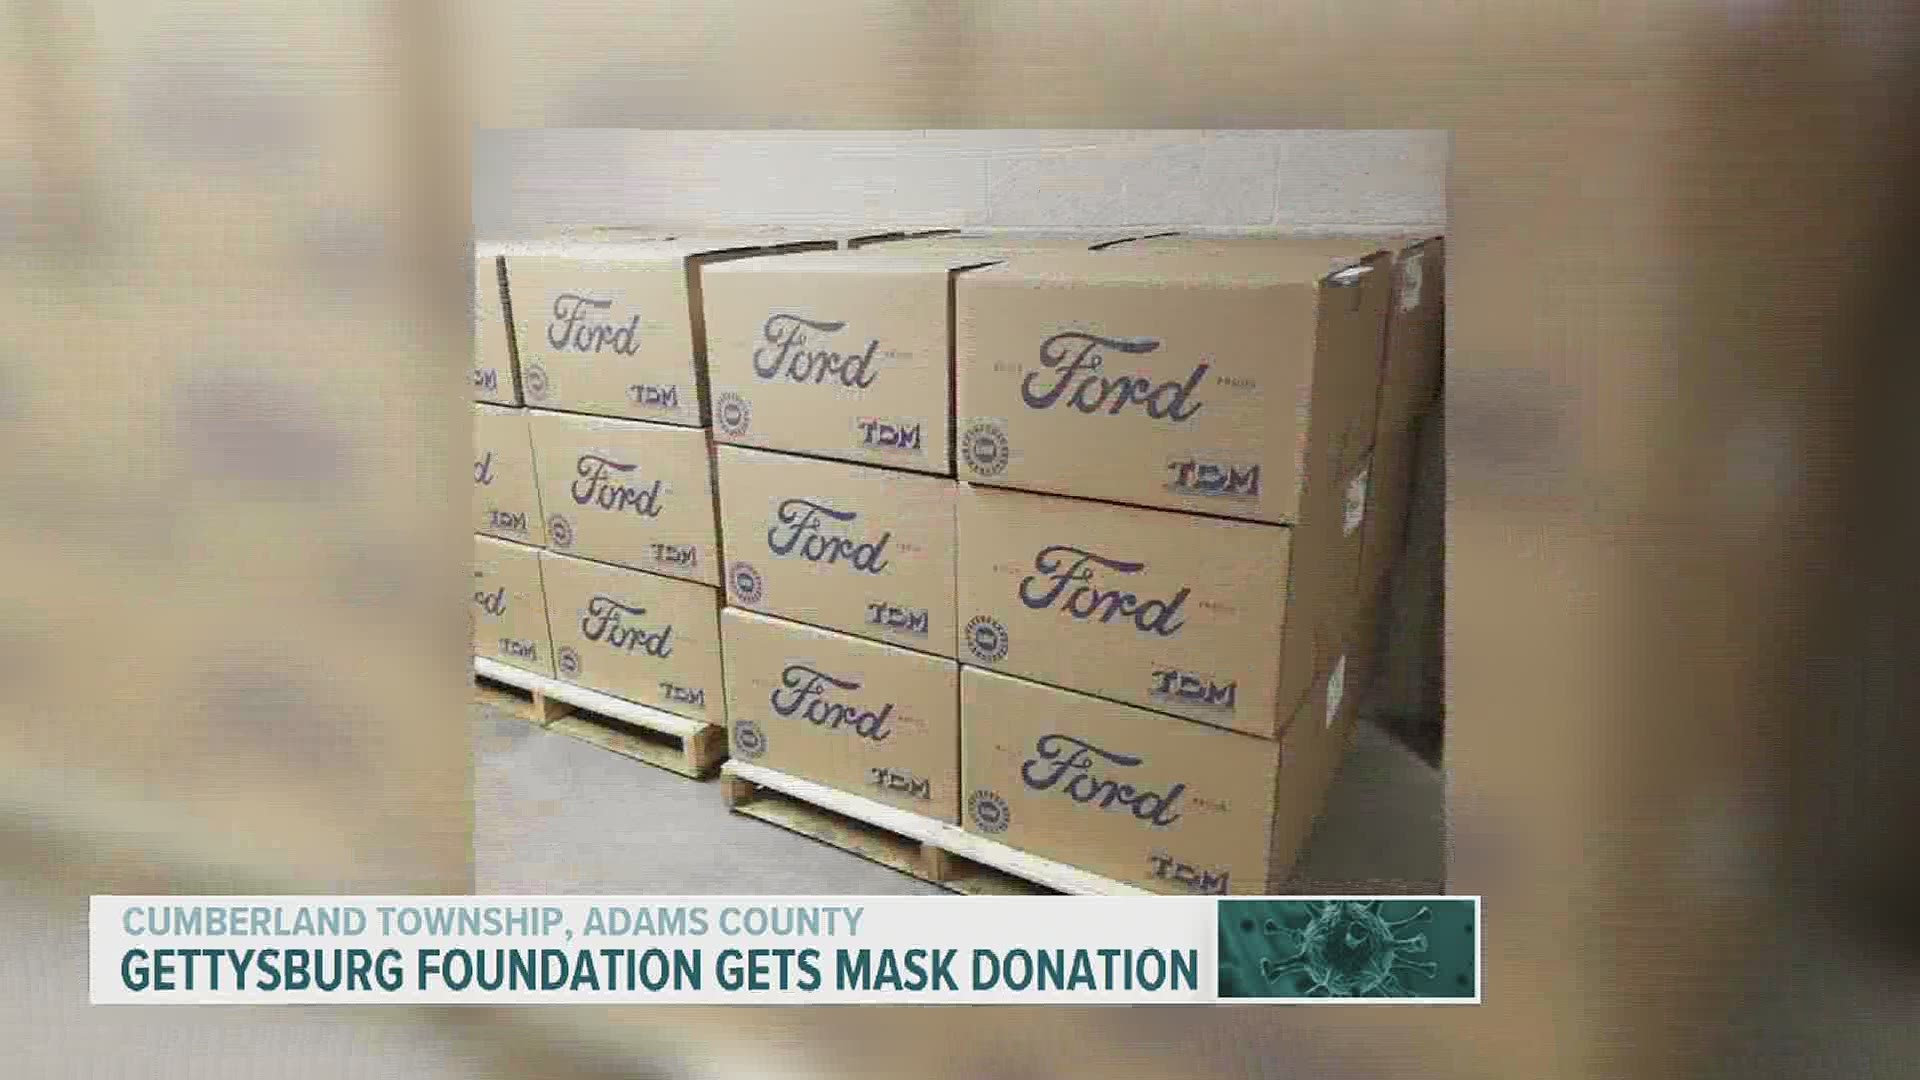 The medical-grade masks will begin to be distributed within the community starting Monday.